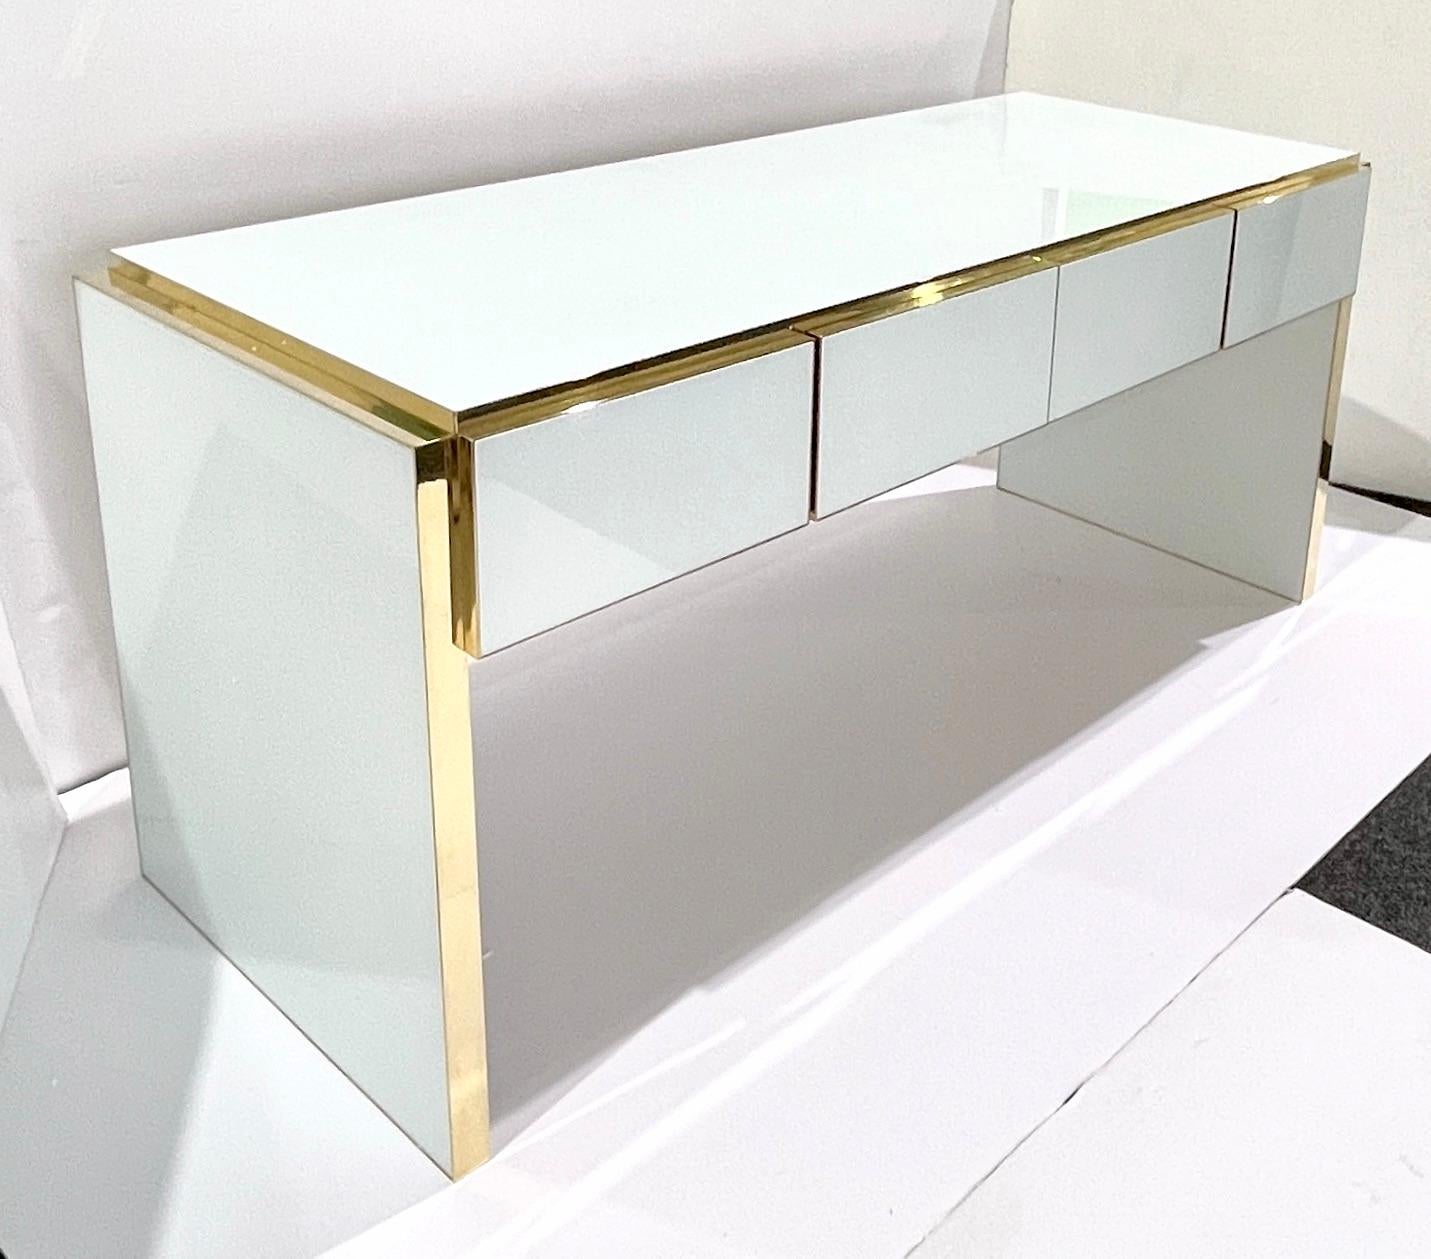 Hand-Crafted Bespoke Italian Art Deco Design 4-Drawer White & Brass Walnut Console Table/Desk For Sale